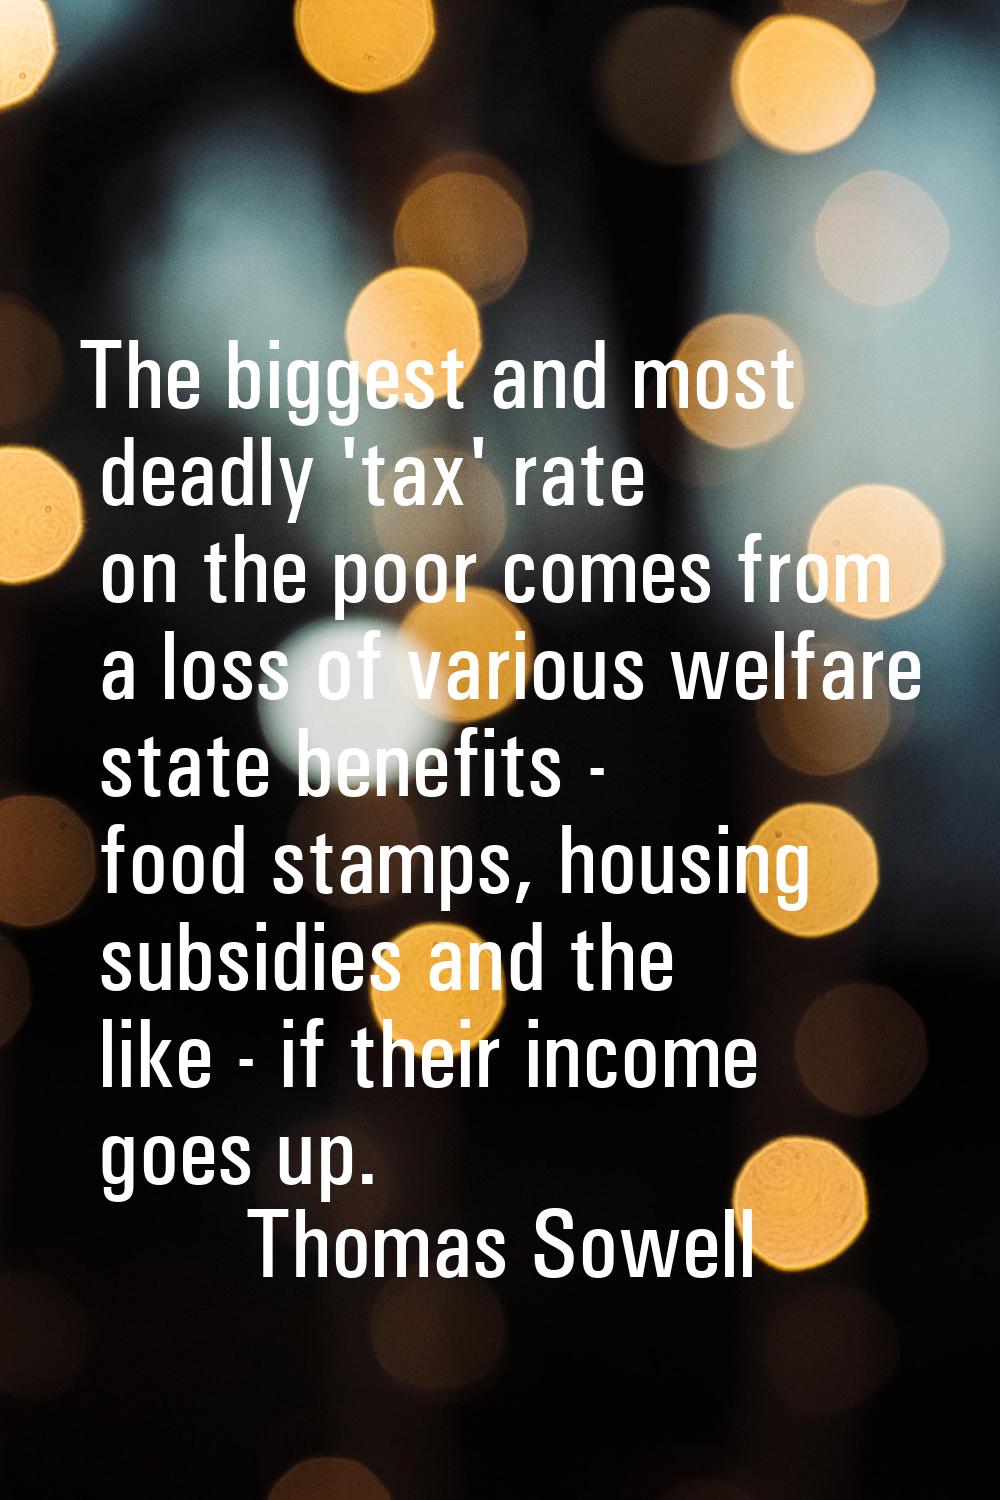 The biggest and most deadly 'tax' rate on the poor comes from a loss of various welfare state benef